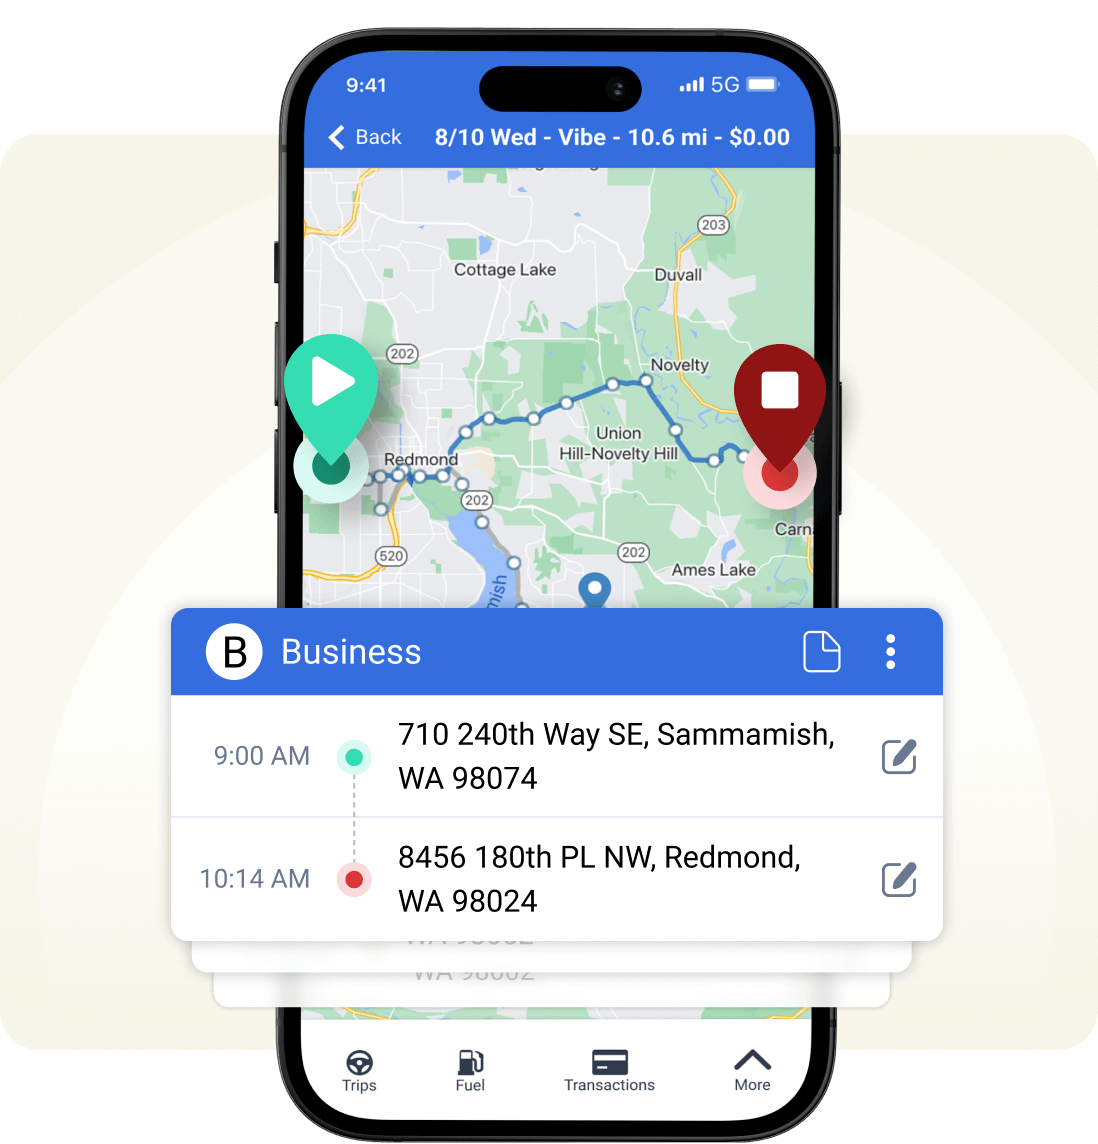 With Daily Trip Journey’s map view, you can easily see a summary of your trips for the day, with an easy one-touch classification of locations and purposes. TripLog also lets you plan your routes for an upcoming workday.